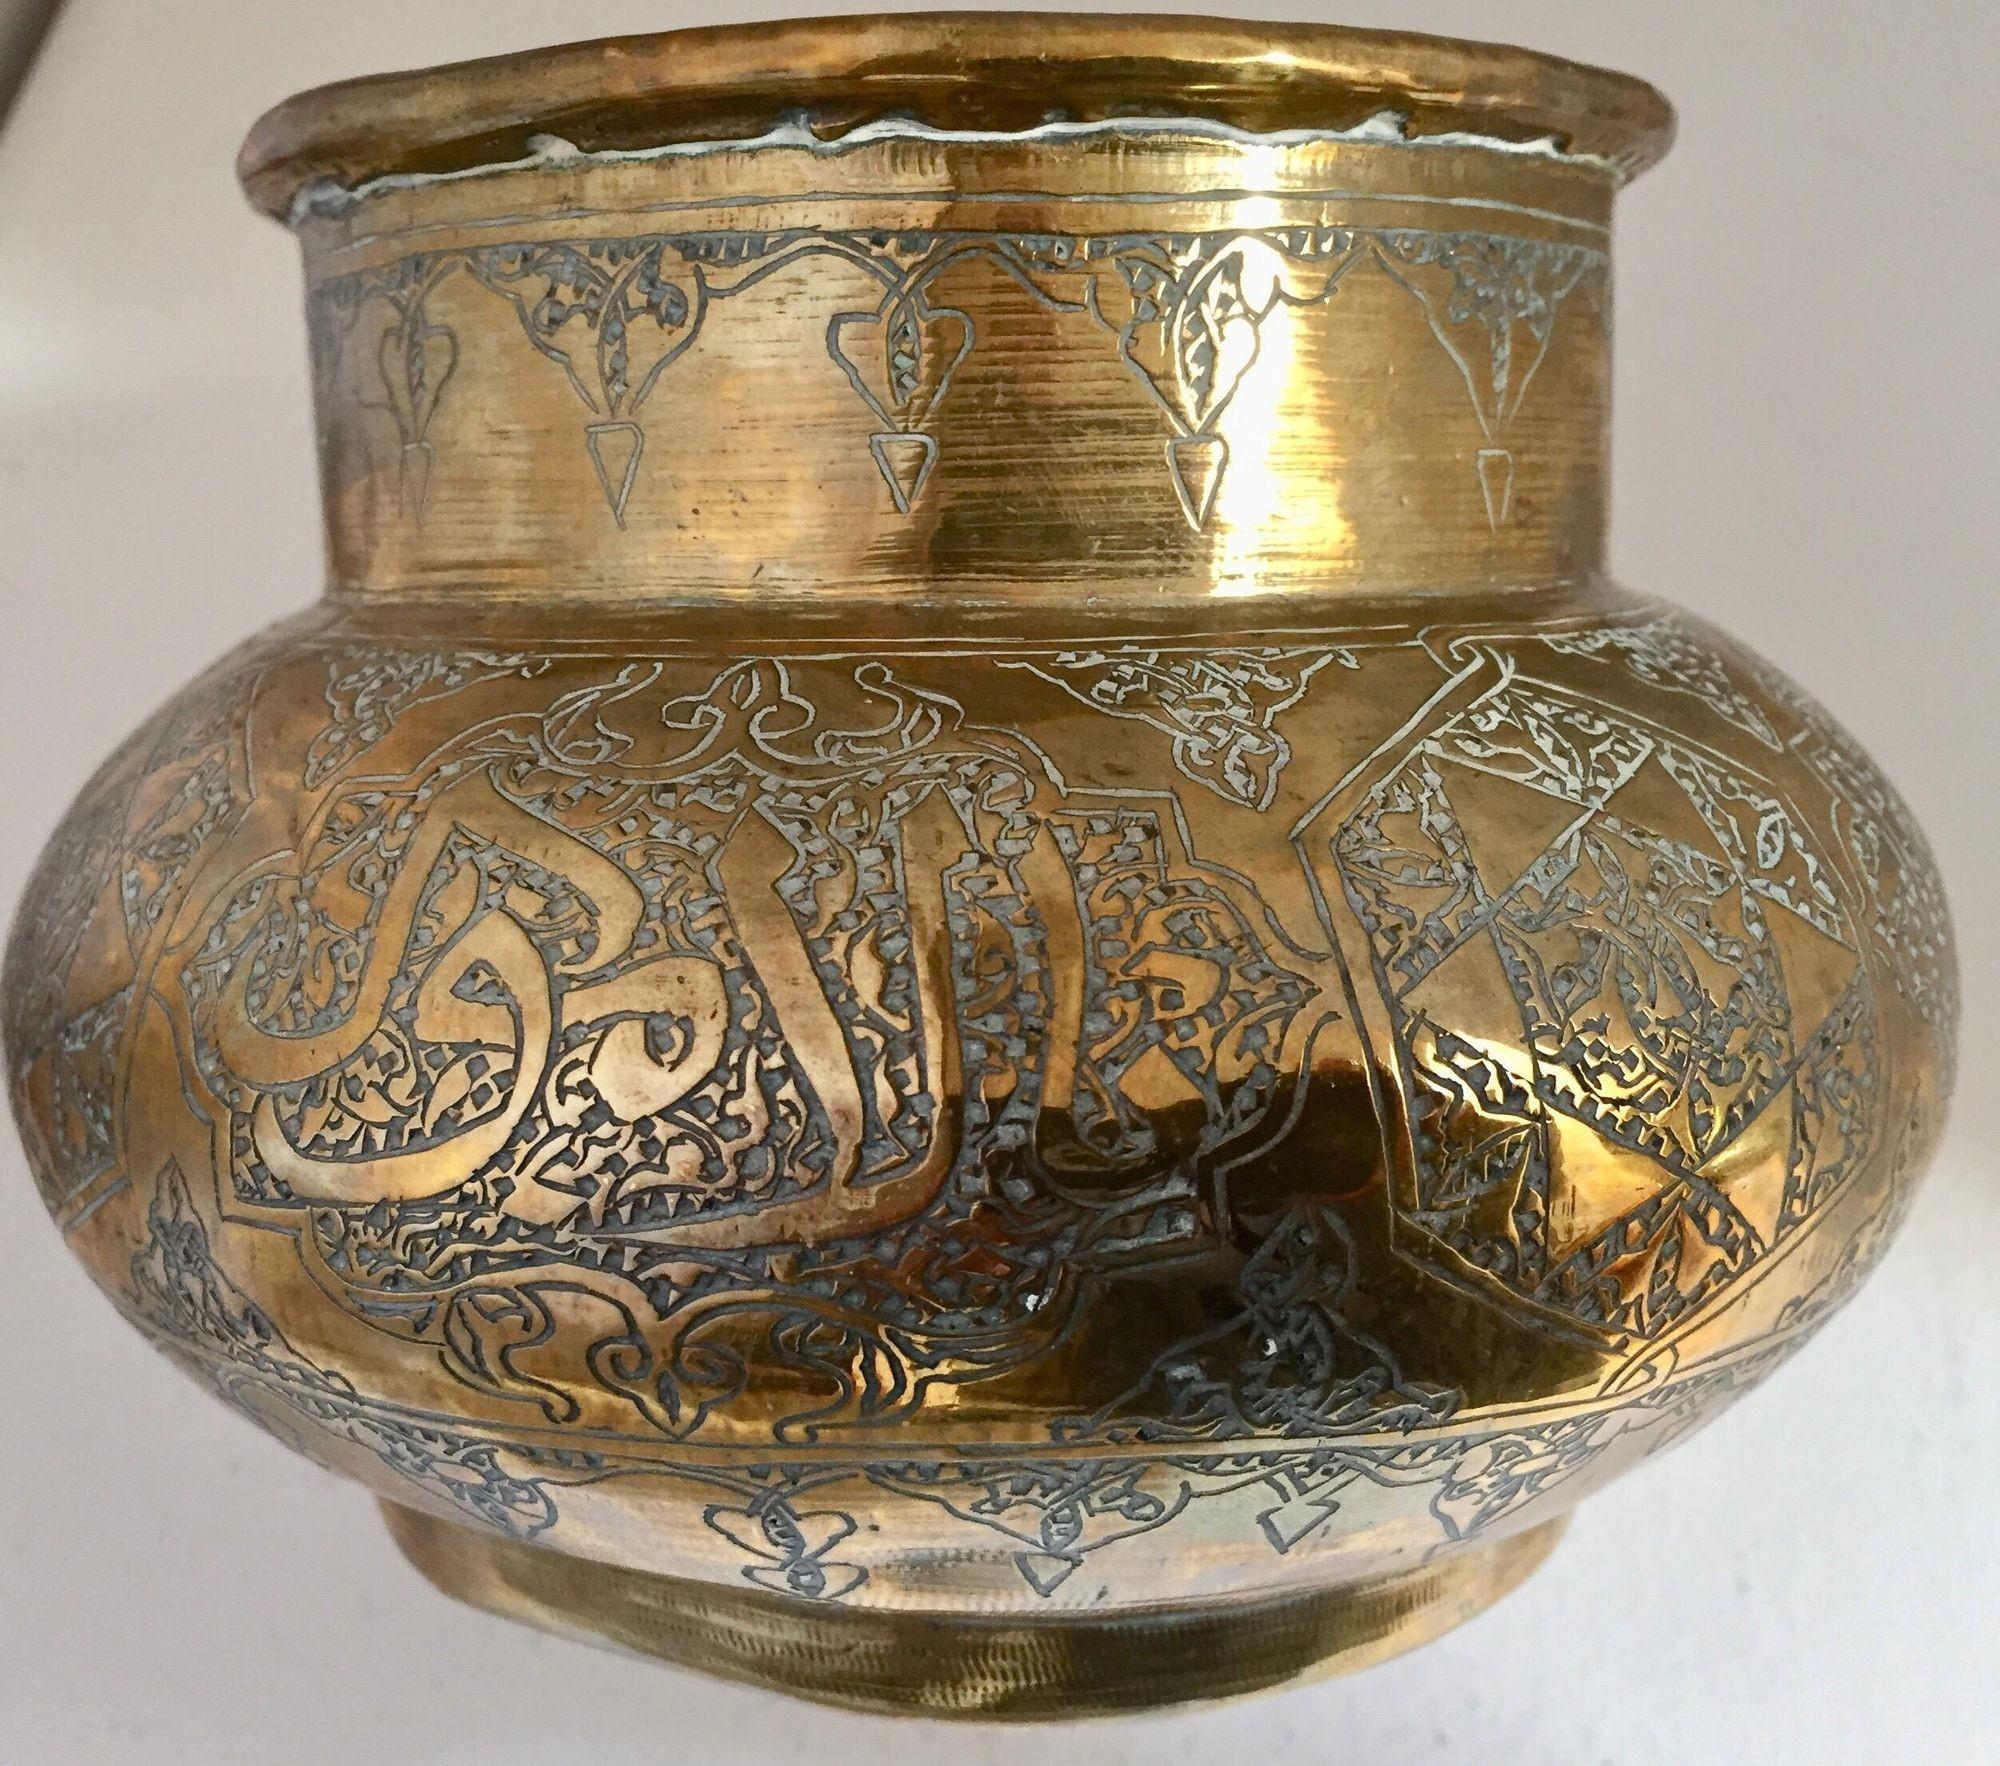 Middle Eastern Hand-Etched Islamic Brass Vase with Calligraphy Writing For Sale 6